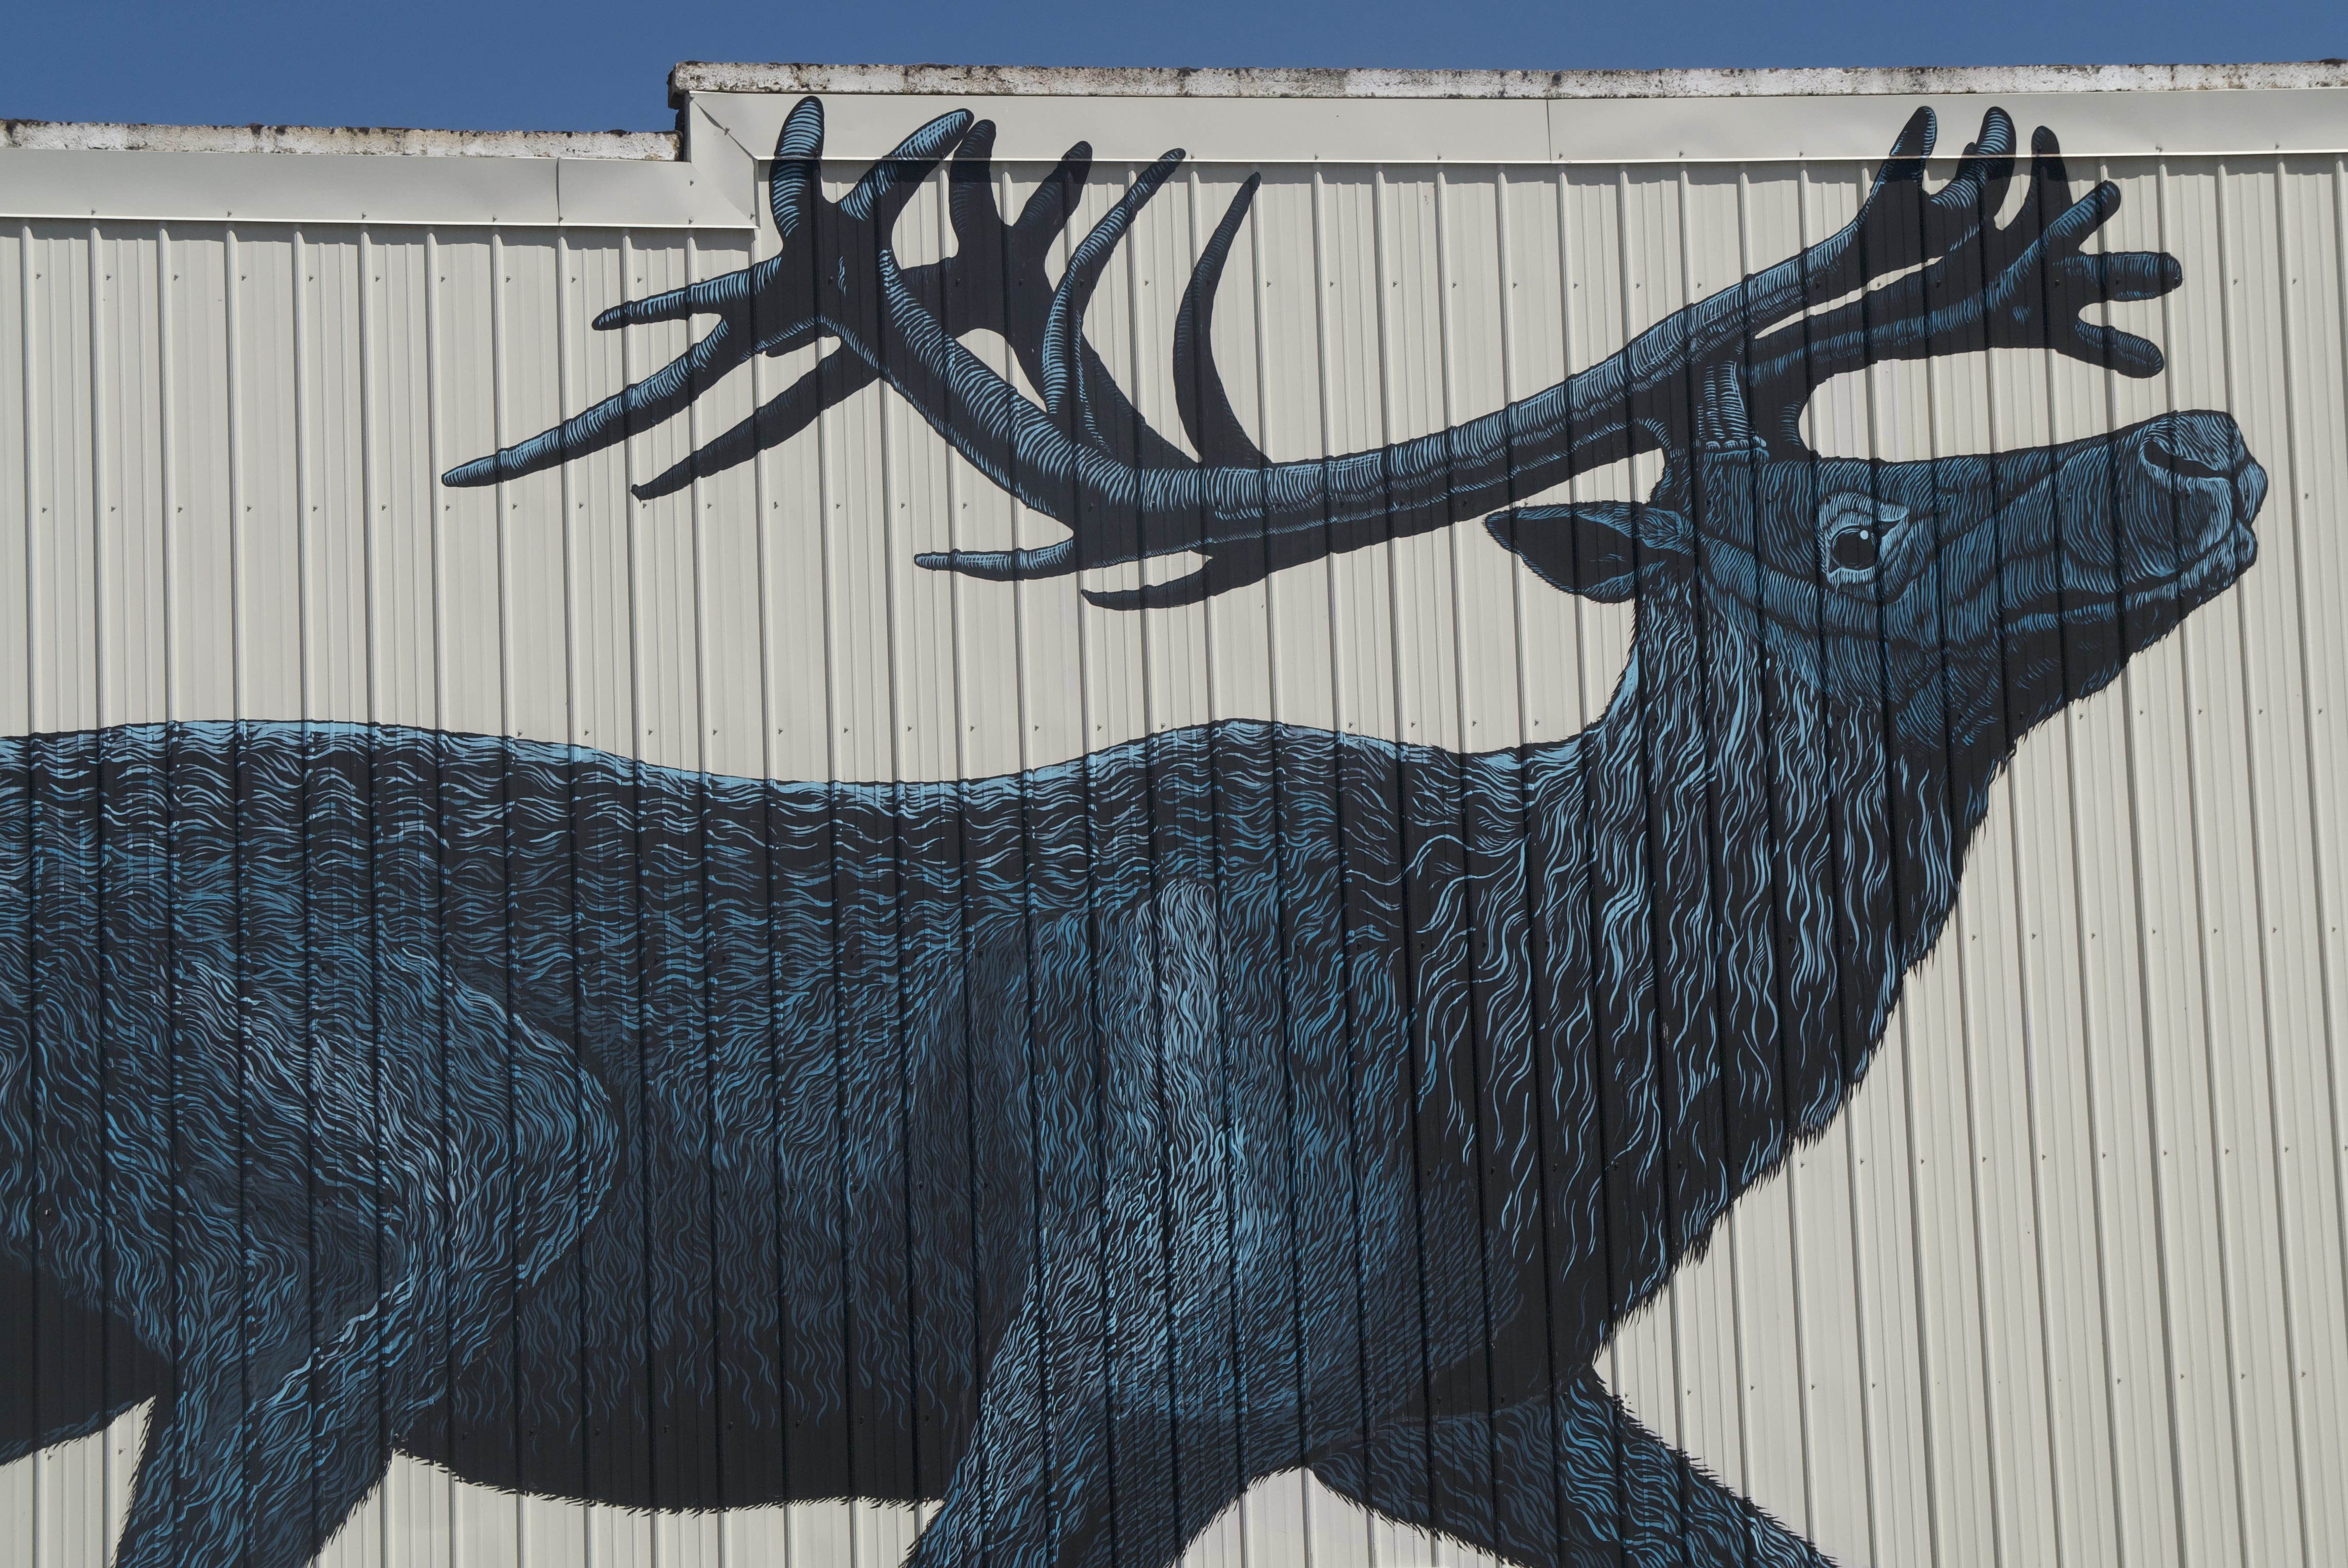 item thumbnail for Caribou mural in Sandpoint, Idaho, by artist Roger Peet